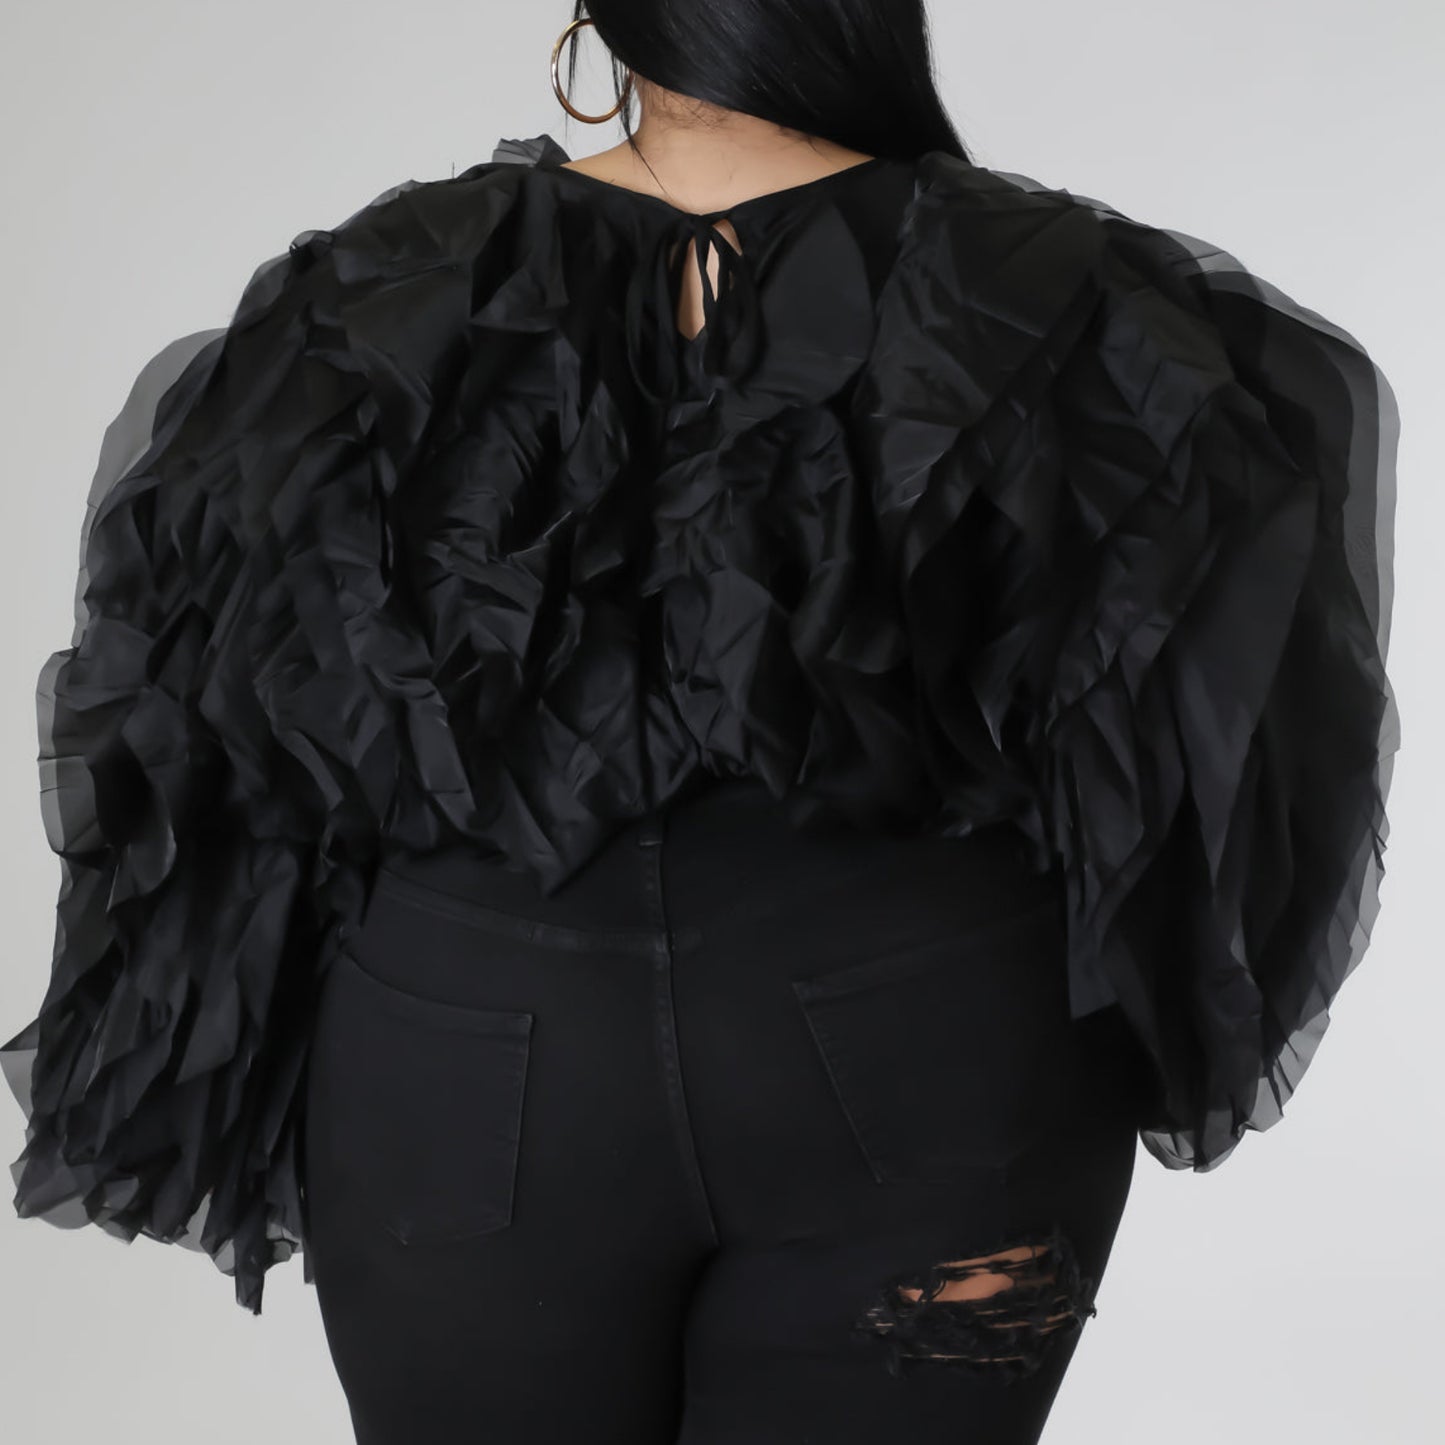 Ruffled Up Top (Small - 3X)